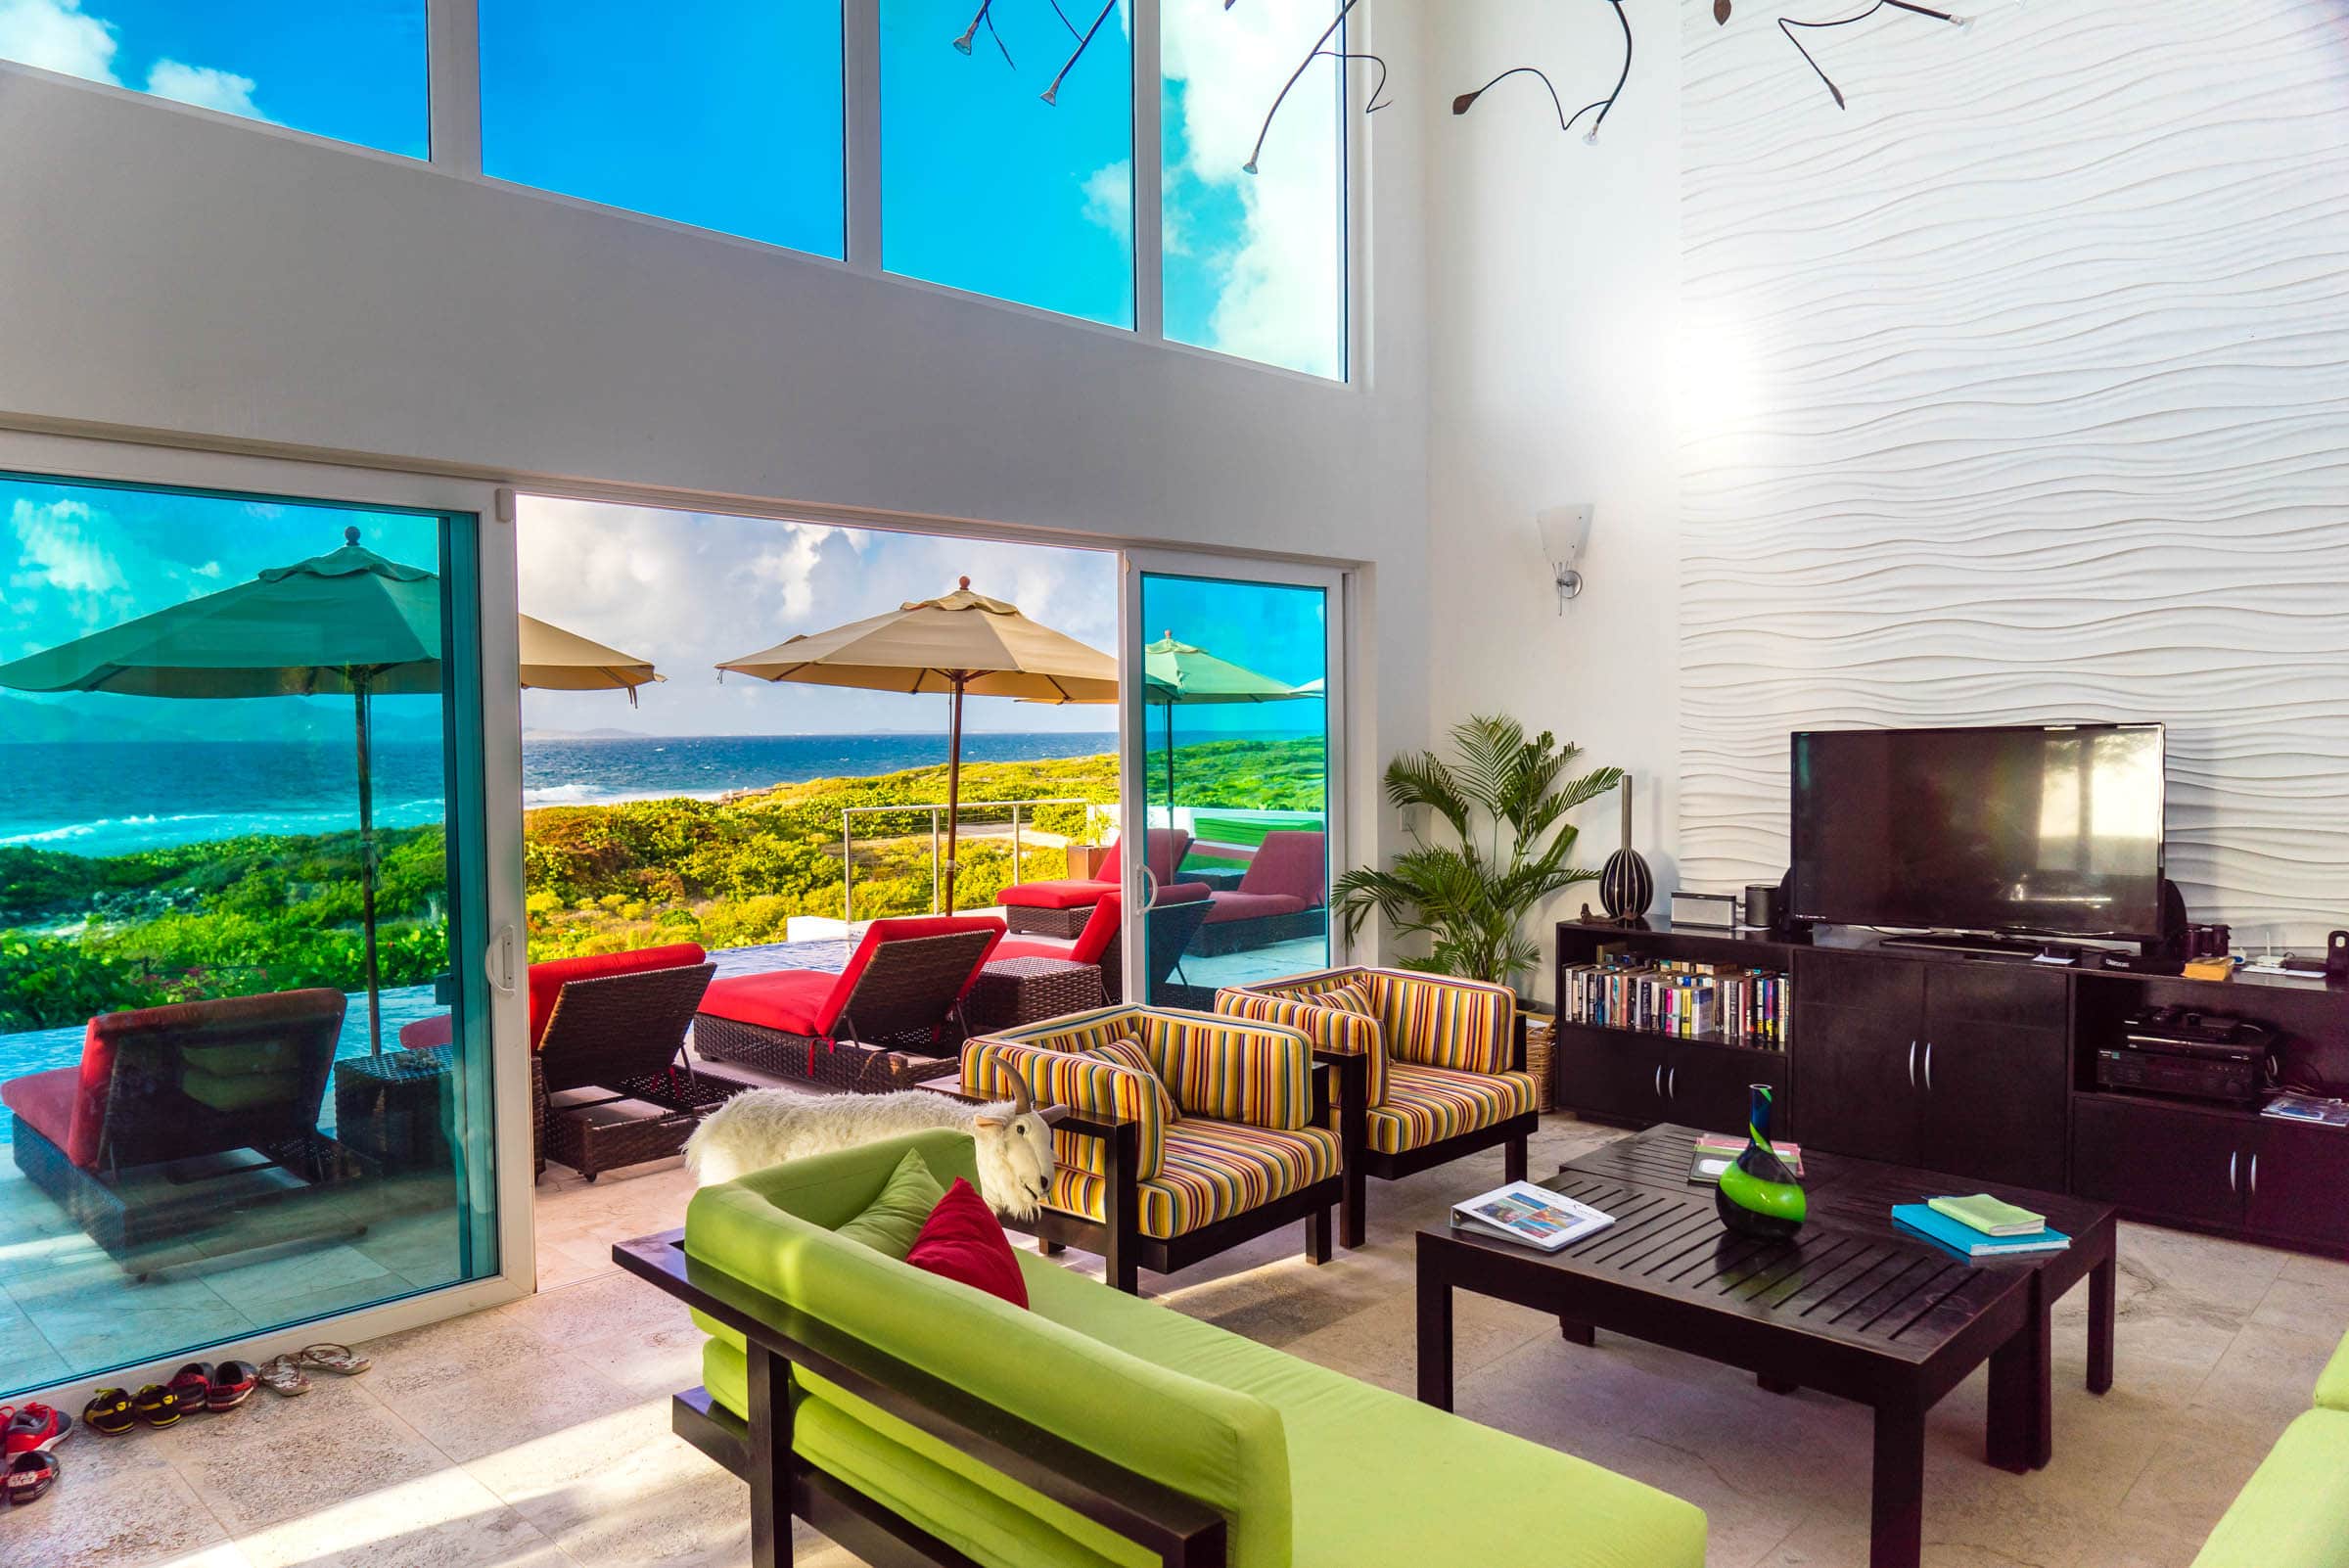 The main living area is a spacious two-story area made more perfect when the doors are opened to welcome the sea breeze.